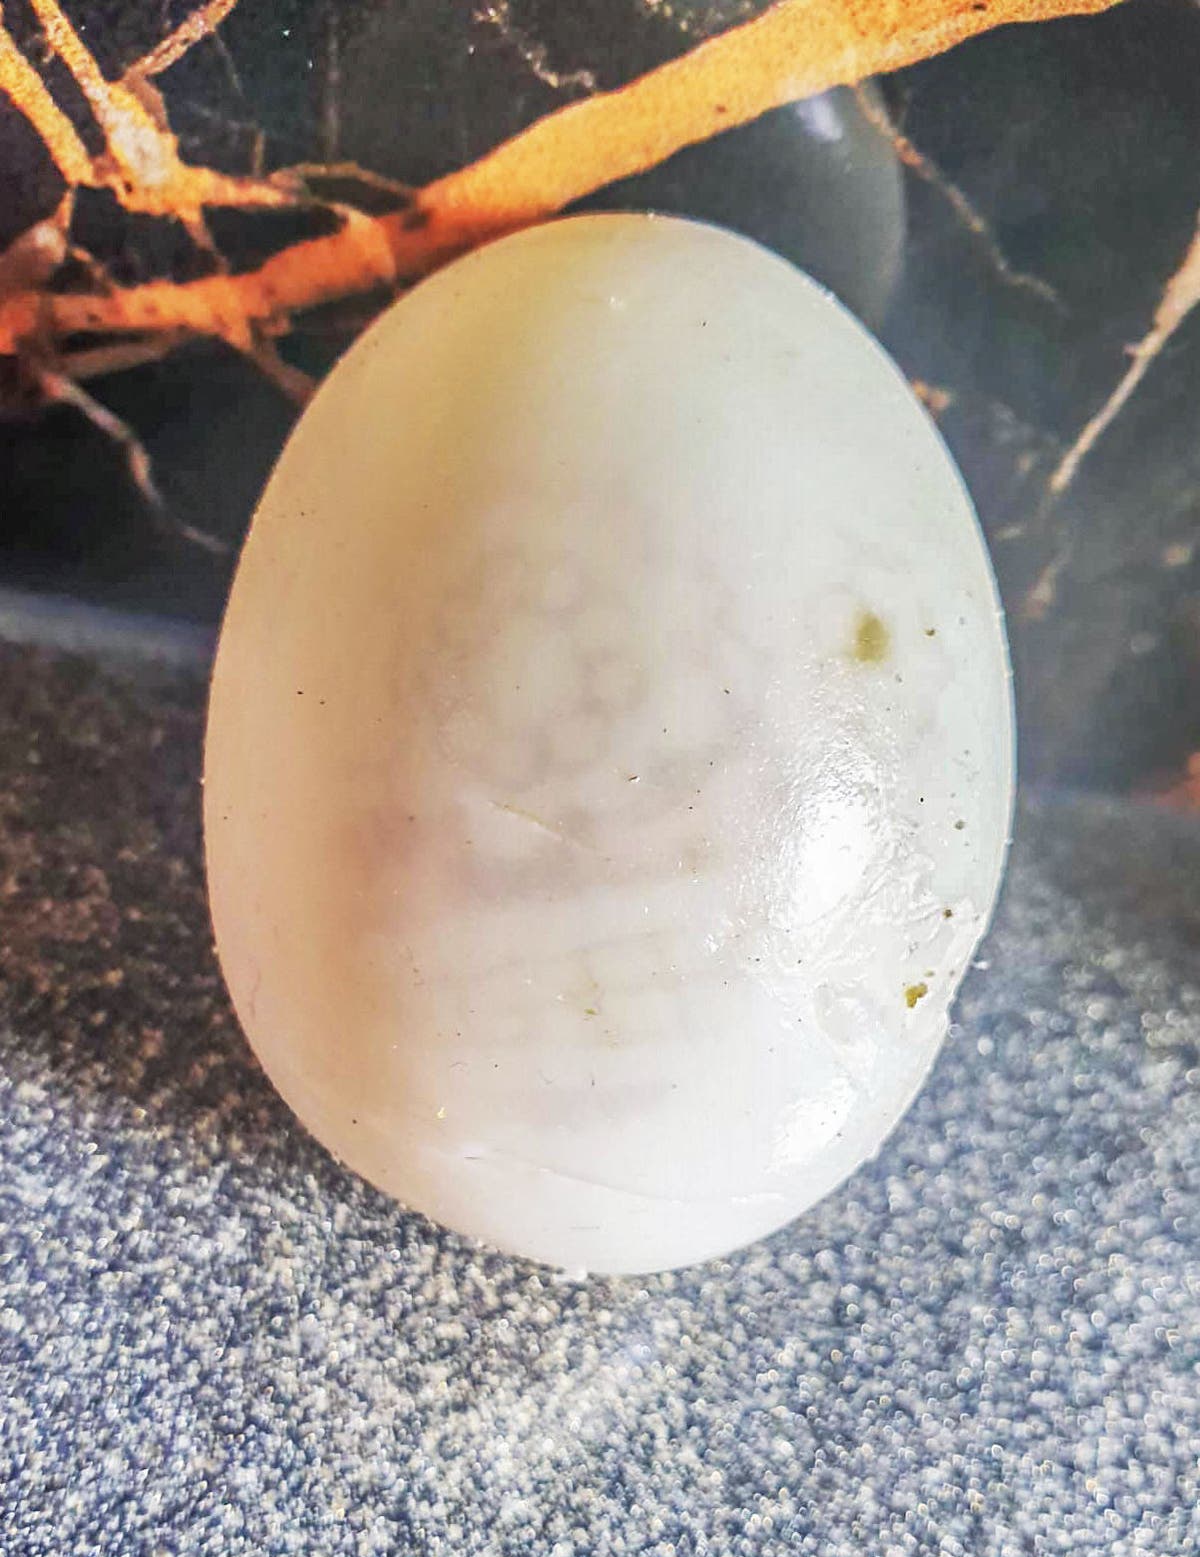 Couple baffled after peeling shell from hard-boiled egg and spotting ...